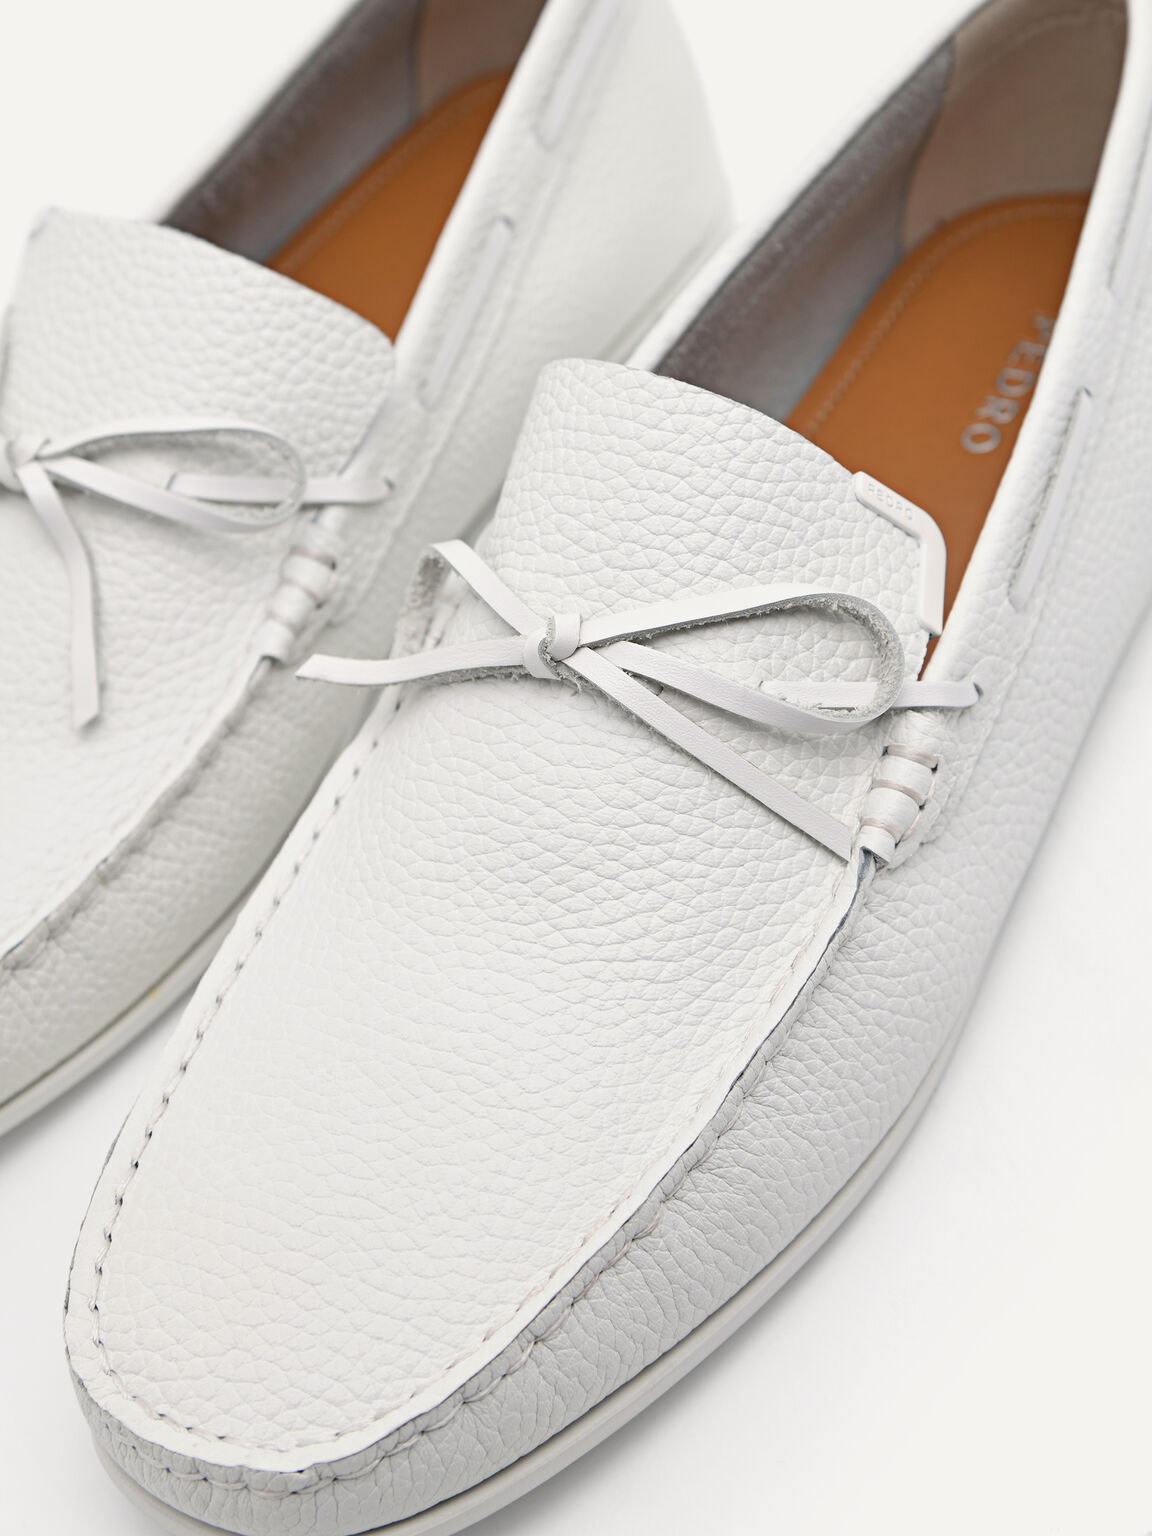 Leather Moccasins with Bow Detail, White